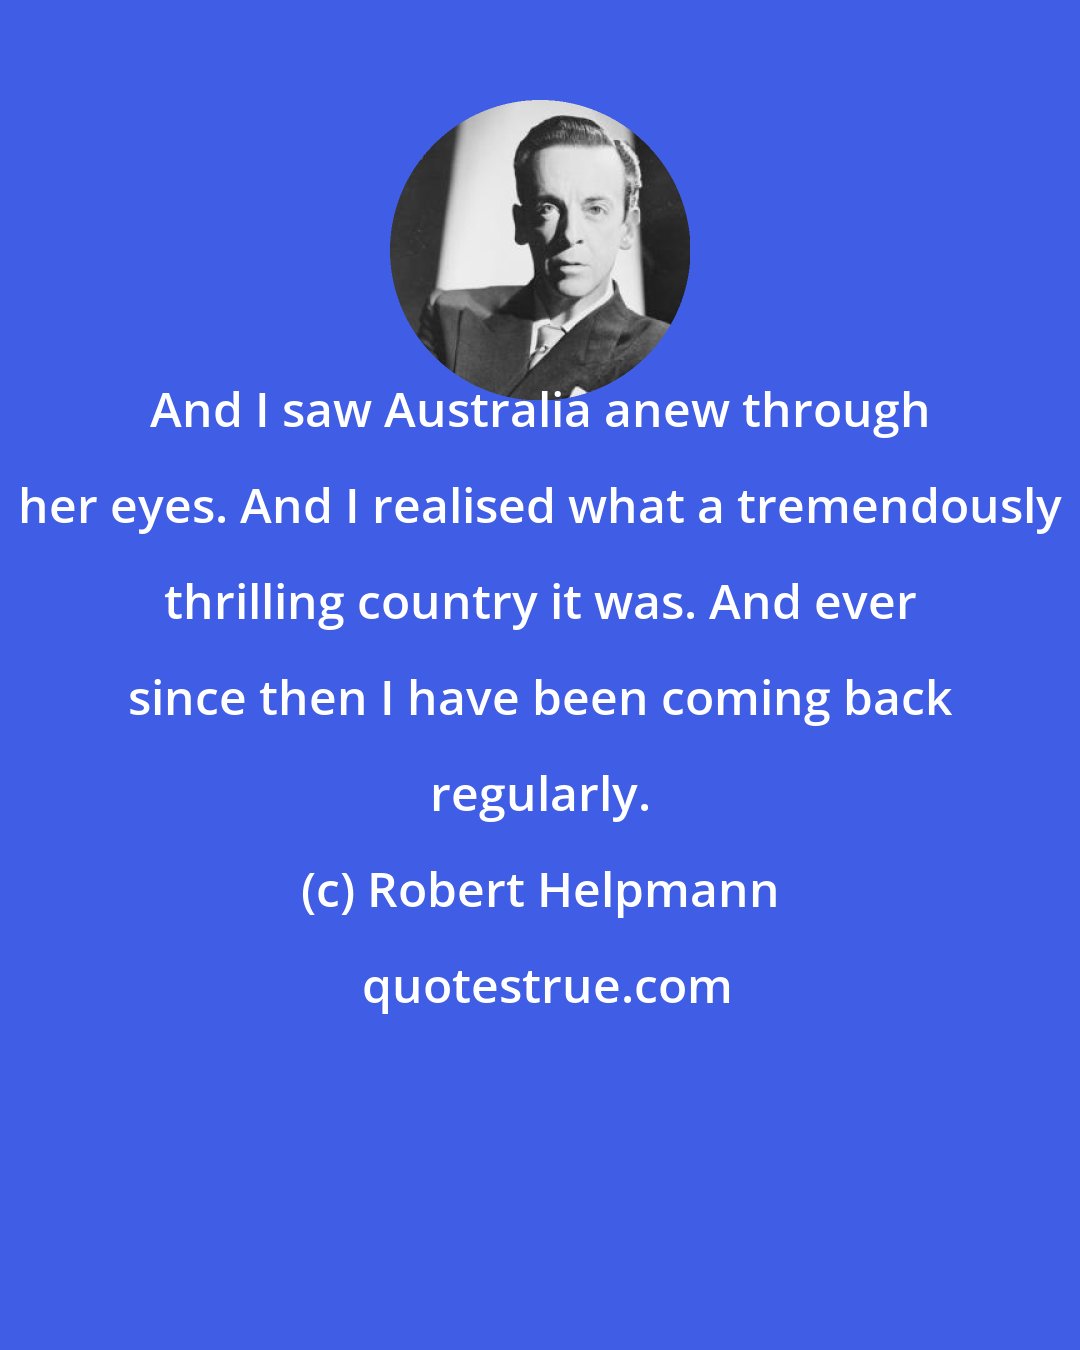 Robert Helpmann: And I saw Australia anew through her eyes. And I realised what a tremendously thrilling country it was. And ever since then I have been coming back regularly.